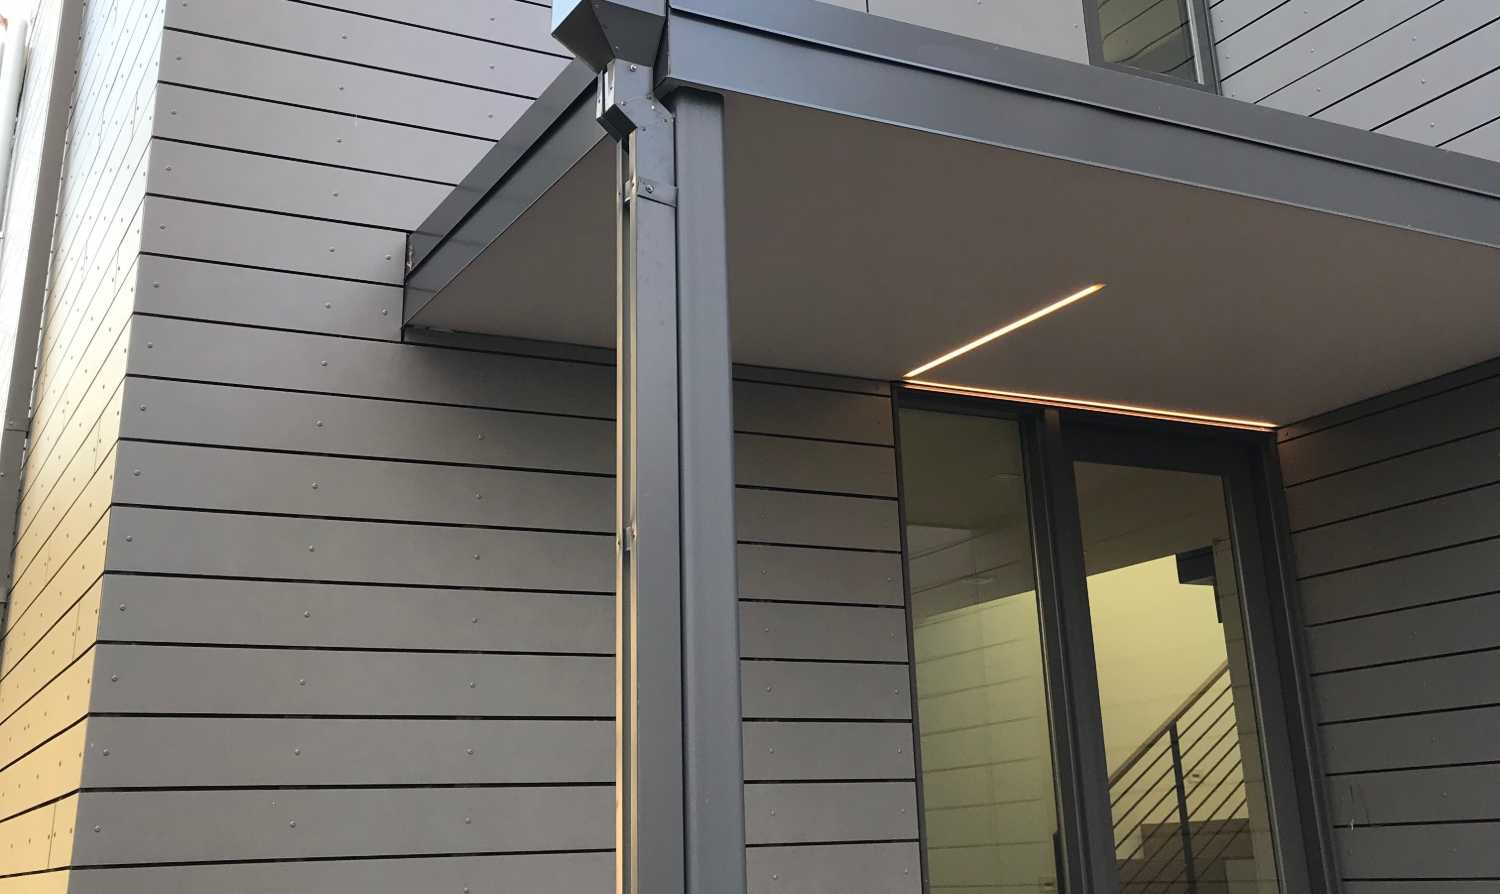 Boulder New Construction Features Lutron Lighting Control + Motorized Shade